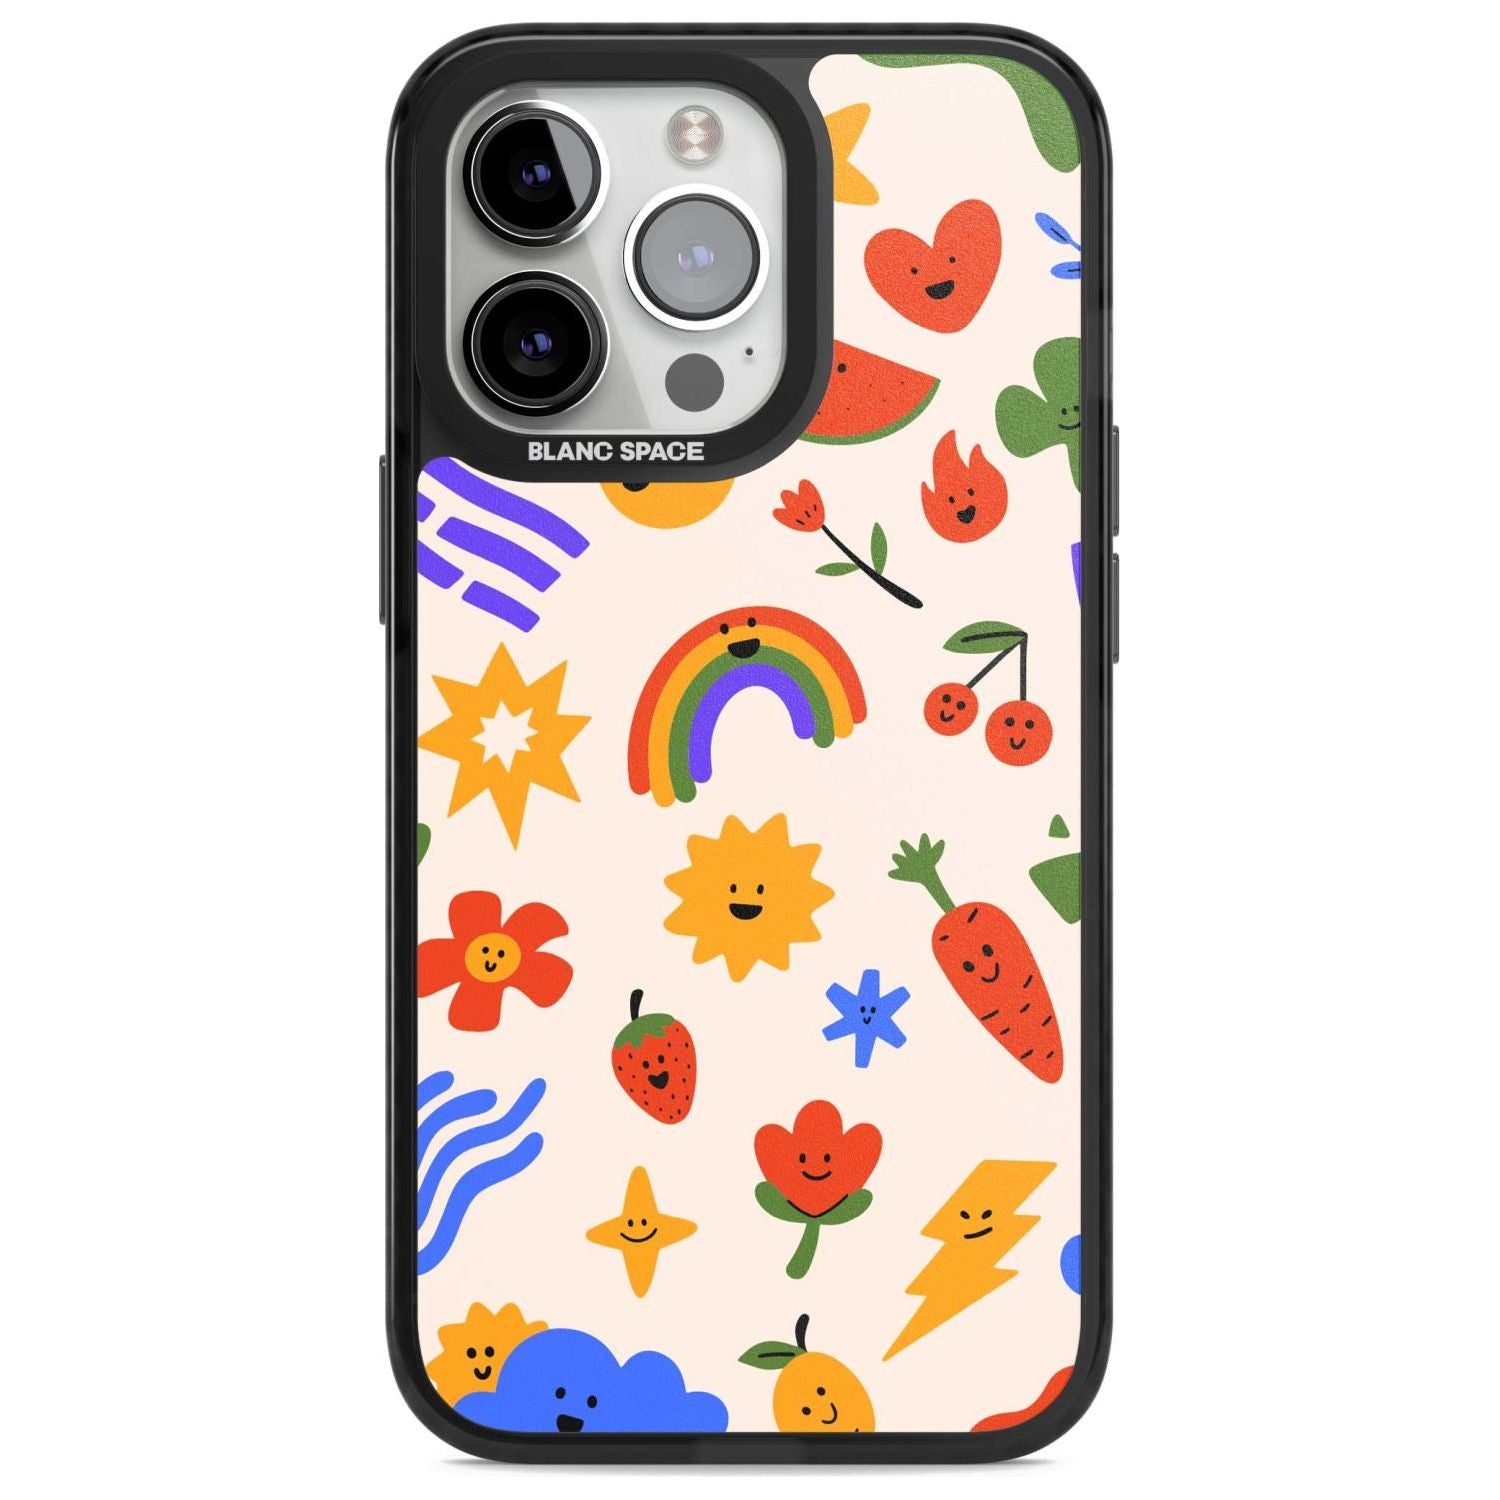 Mixed Large Kawaii Icons - Solid Phone Case iPhone 15 Pro Max / Magsafe Black Impact Case,iPhone 15 Pro / Magsafe Black Impact Case,iPhone 14 Pro Max / Magsafe Black Impact Case,iPhone 14 Pro / Magsafe Black Impact Case,iPhone 13 Pro / Magsafe Black Impact Case Blanc Space